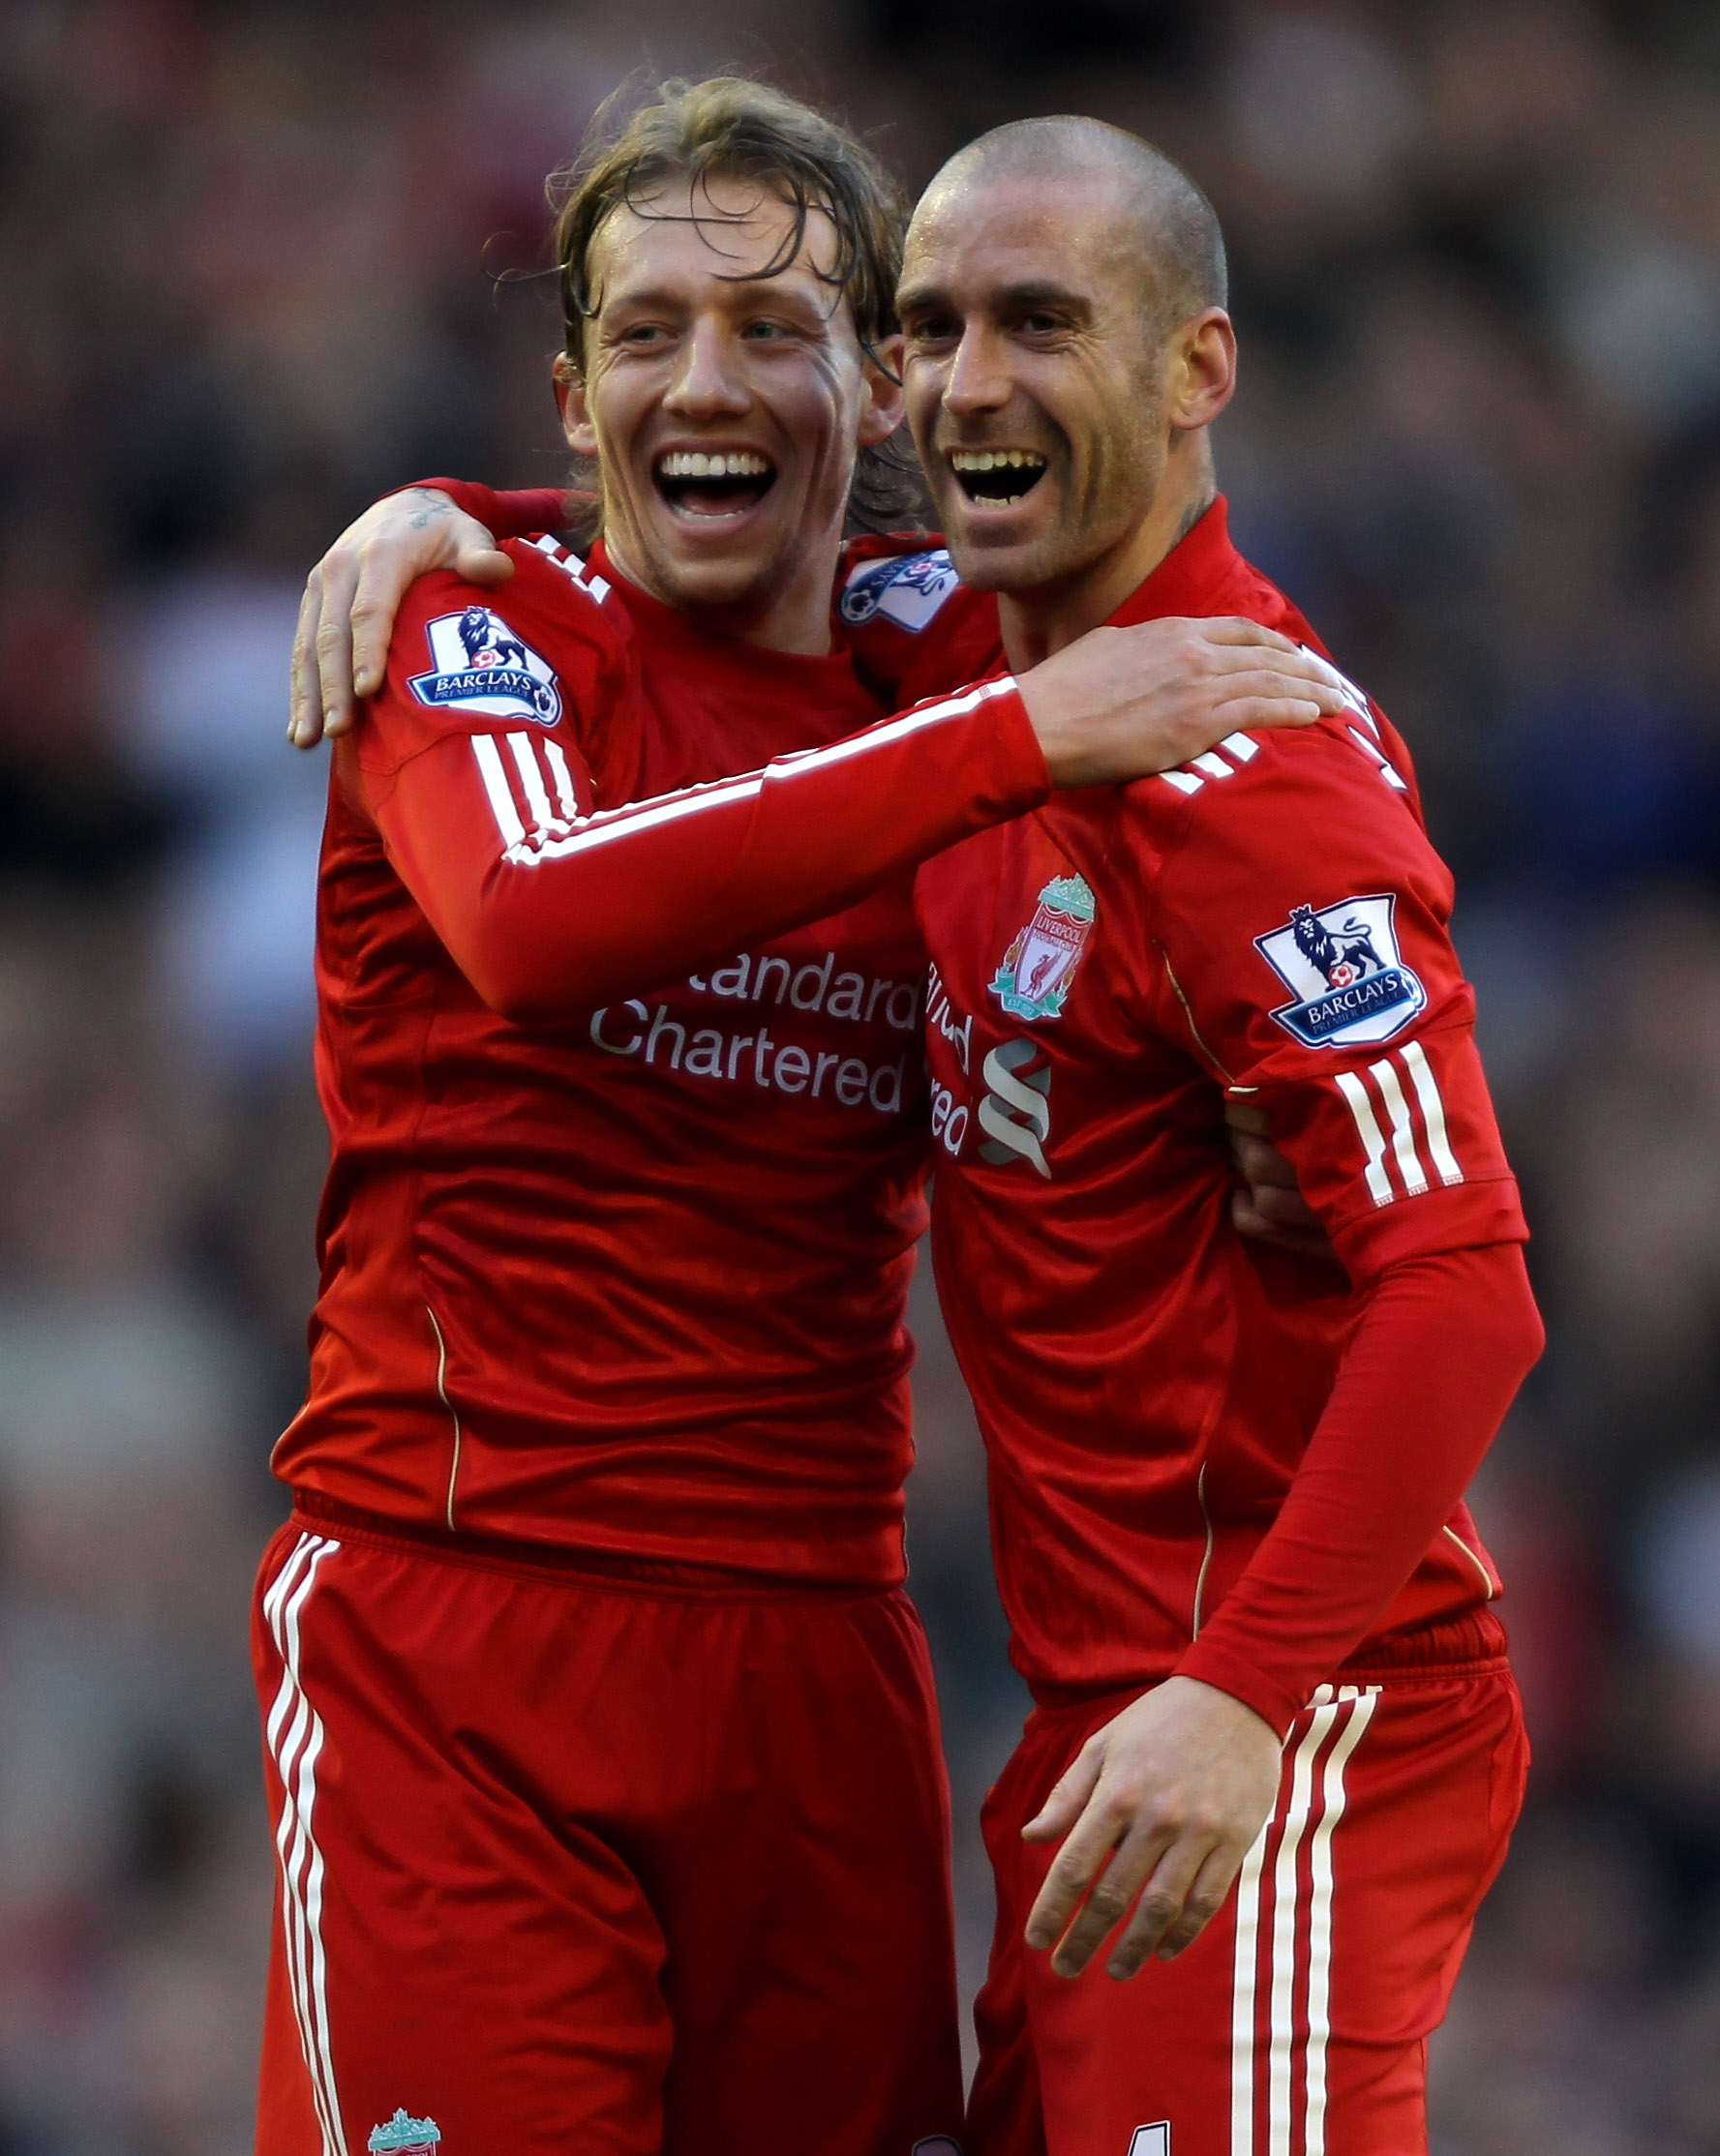 LIVERPOOL, ENGLAND - FEBRUARY 12:  Raul Meireles (R) of Liverpool celebrates scoring the opening goal with team mate Lucas during the Barclays Premier League match between Liverpool and Wigan Athletic at Anfield on February 12, 2011 in Liverpool, England.